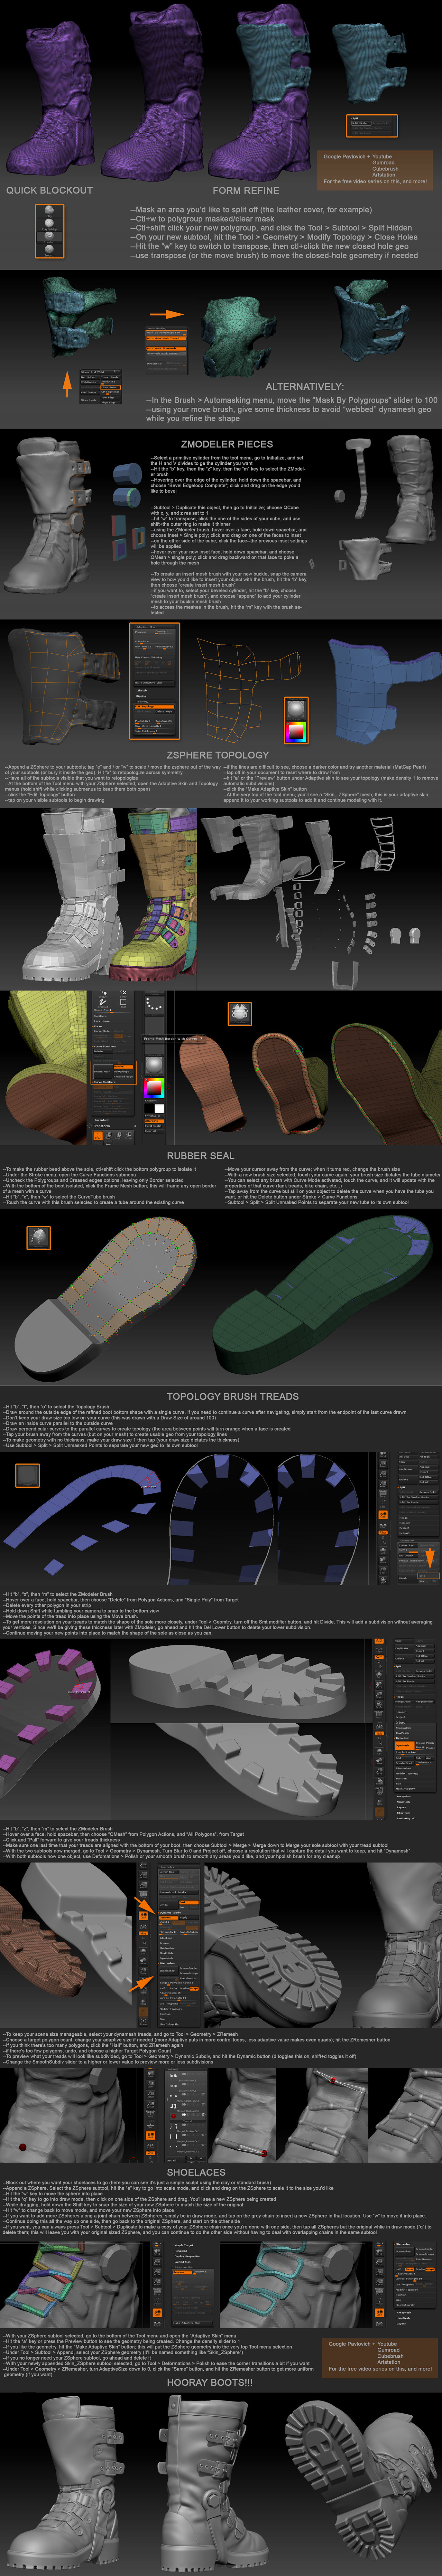 Shoes Boot _ Zbrush Tutorial _ by Michael Pavlovich Shoes Boot Shoes Boot